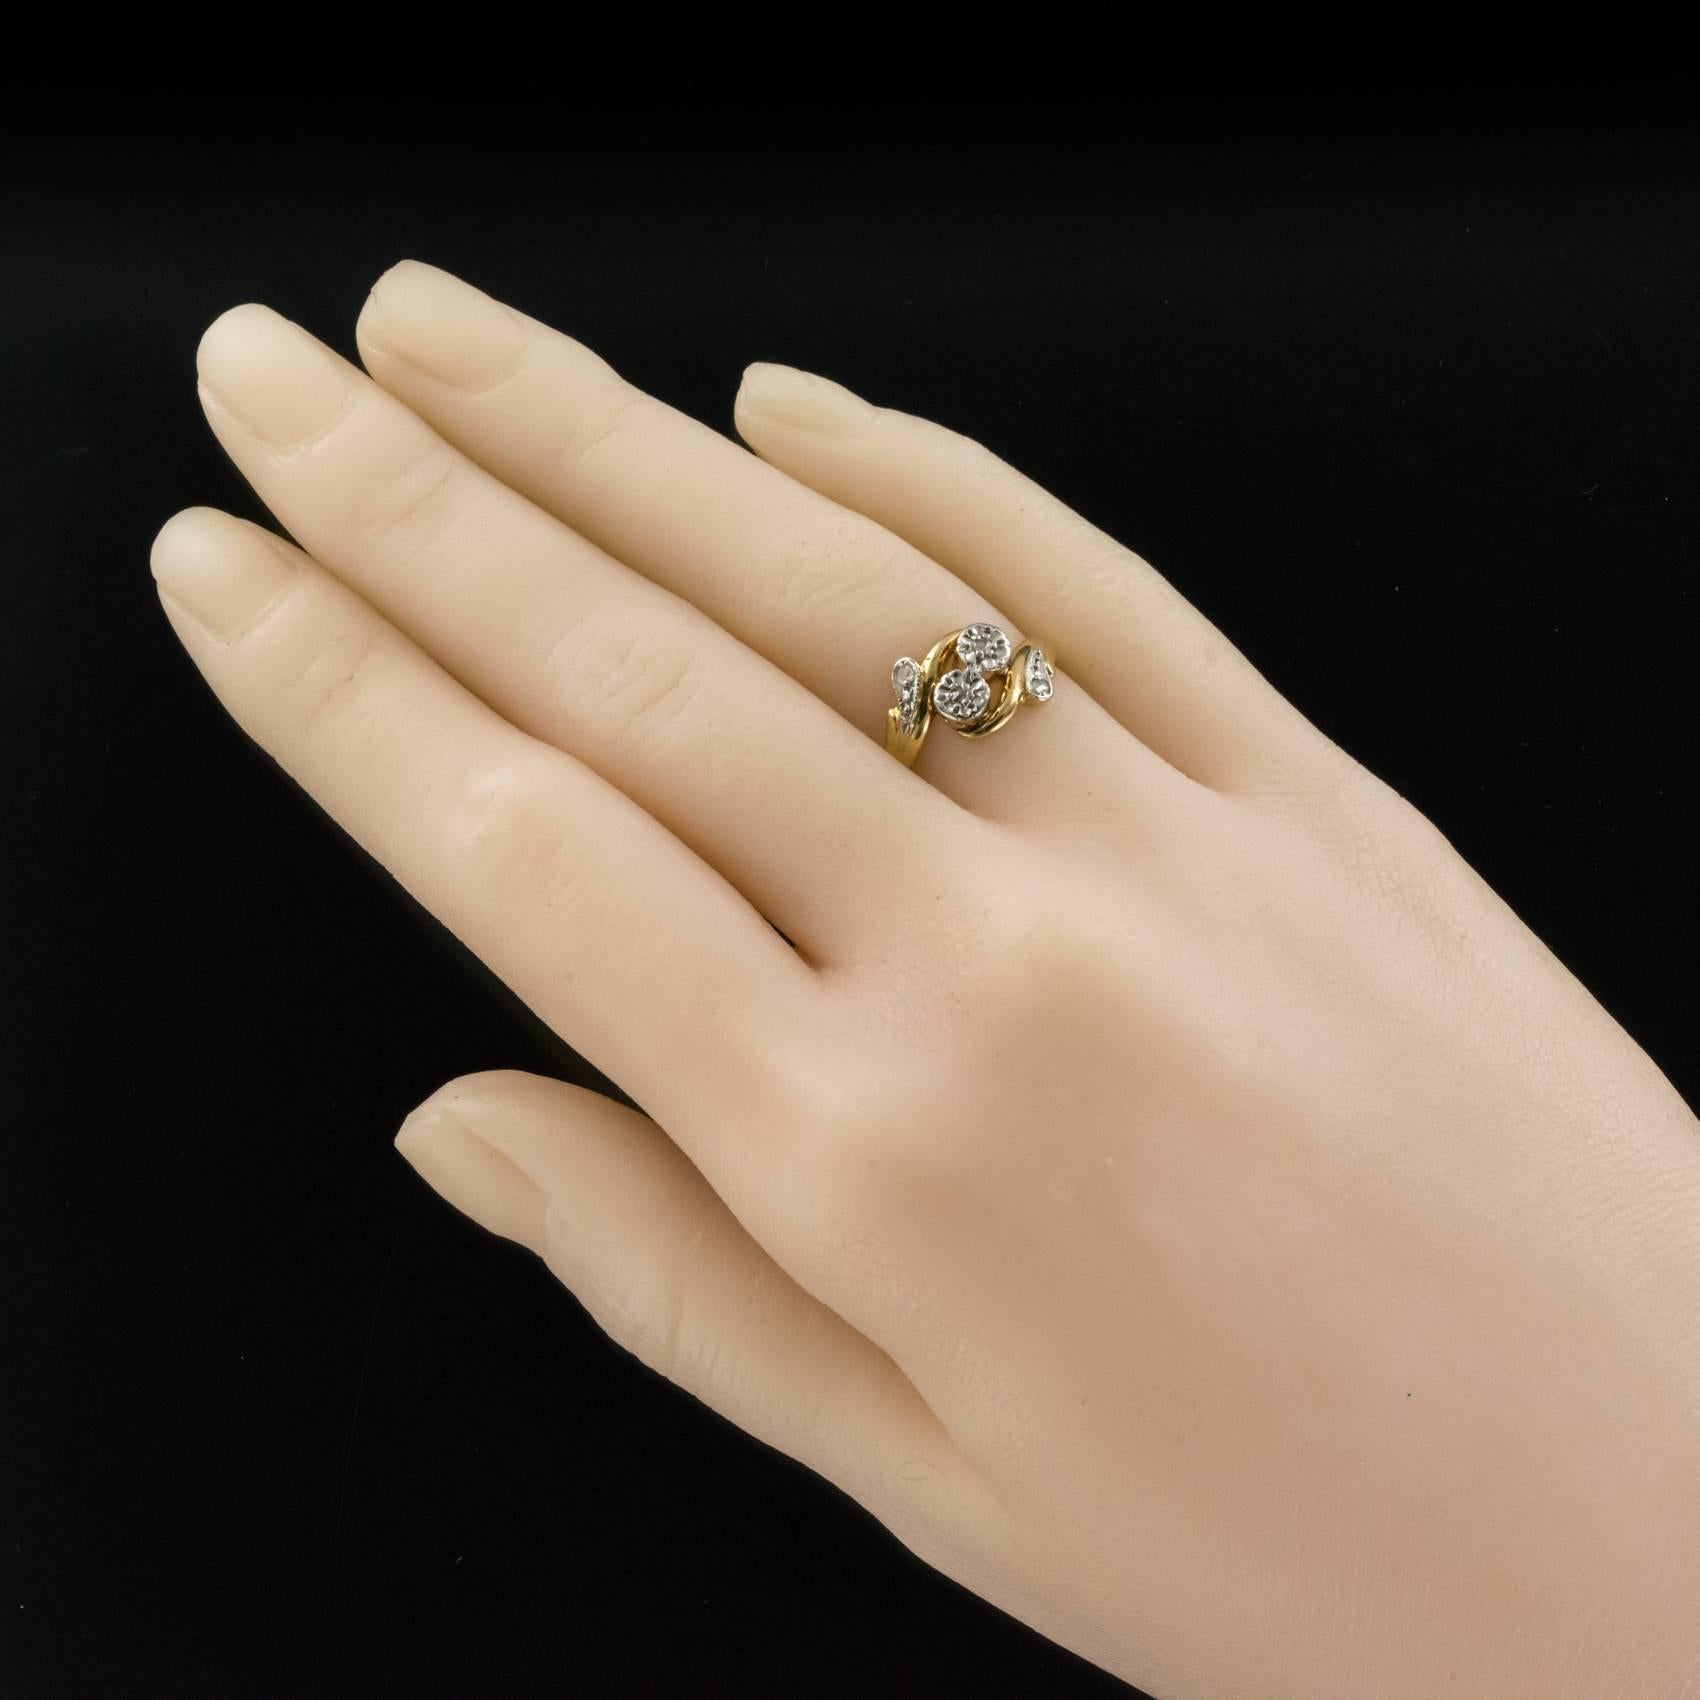 Ring in 18 karats yellow gold, horse's head hallmark.
Lovely antique ring, it is set on its top with 2 rose-cut diamonds set with starred. On either side of the central motif, two drop patterns are chiseled and set with a rose-cut diamond.
Height: